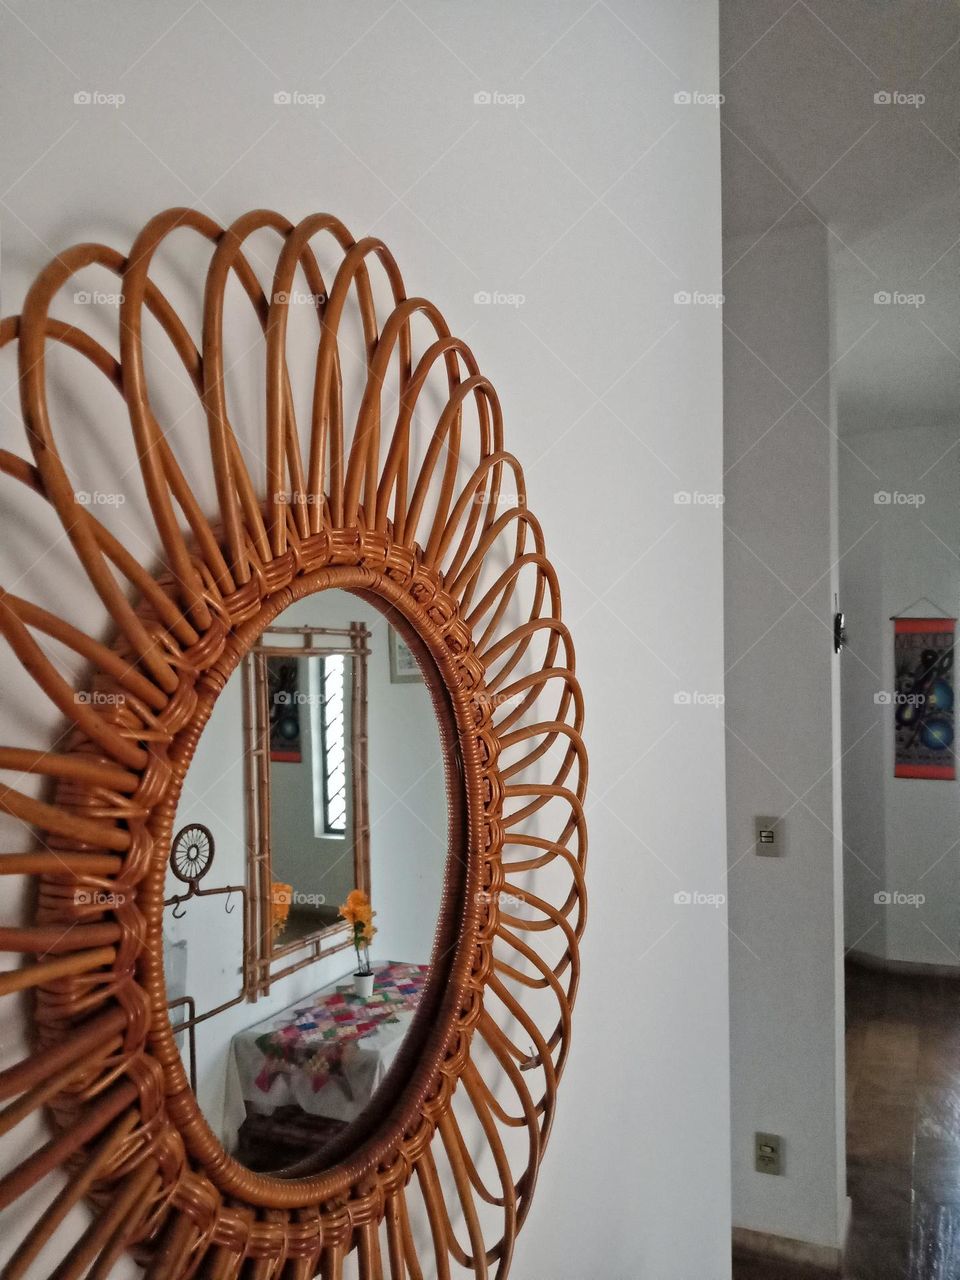 A rectangular mirror in a round mirror at a hall.